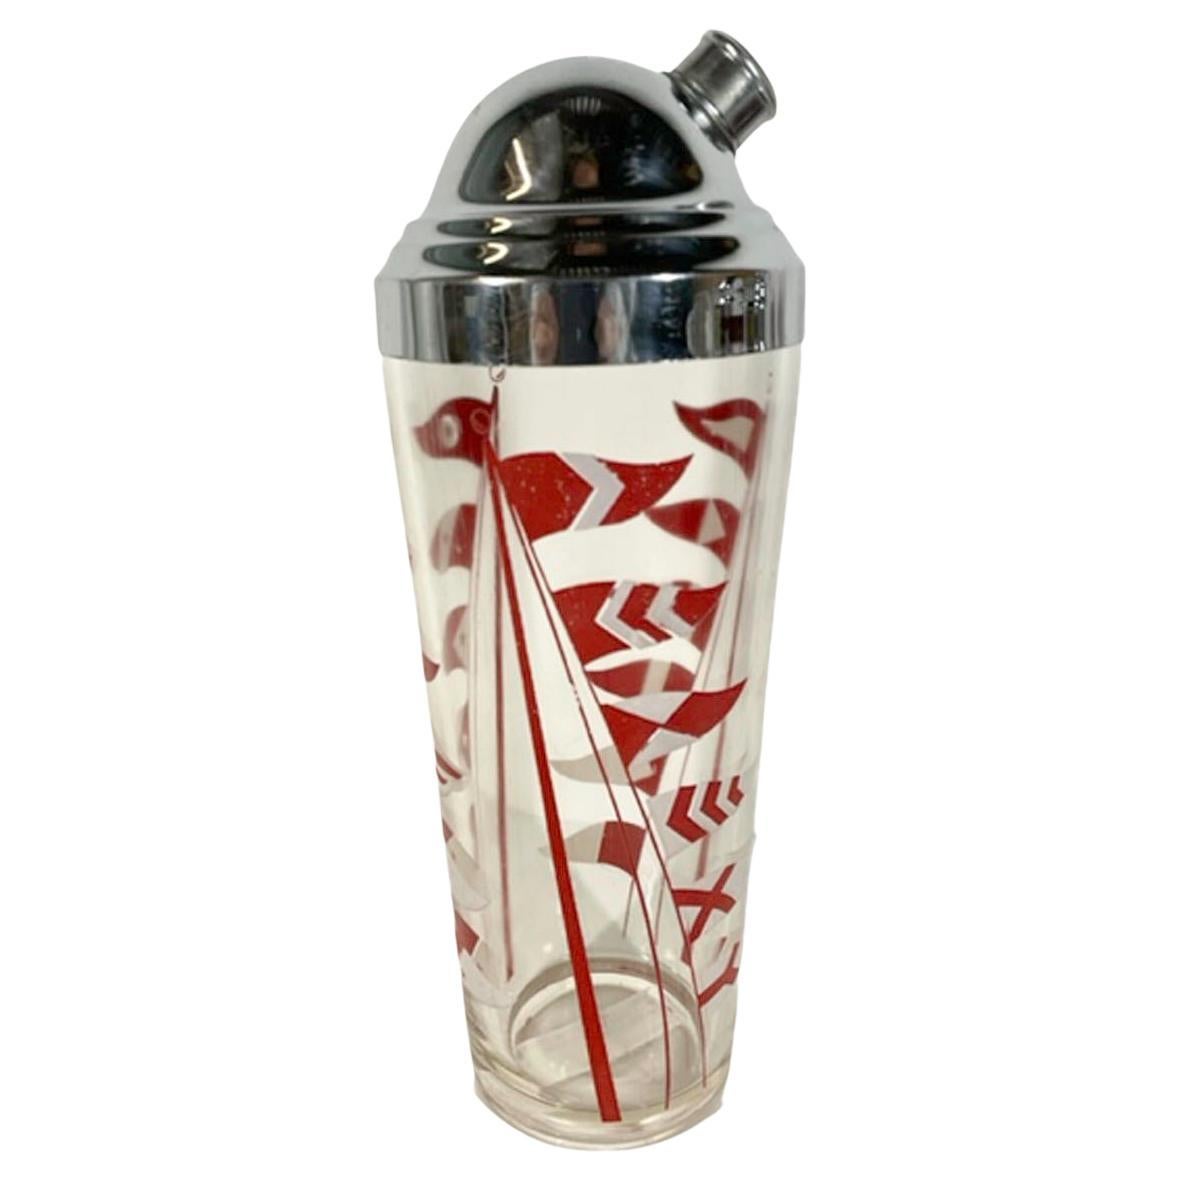 Art Deco Hazel-Atlas Cocktail Shaker with Red and White Nautical Flags